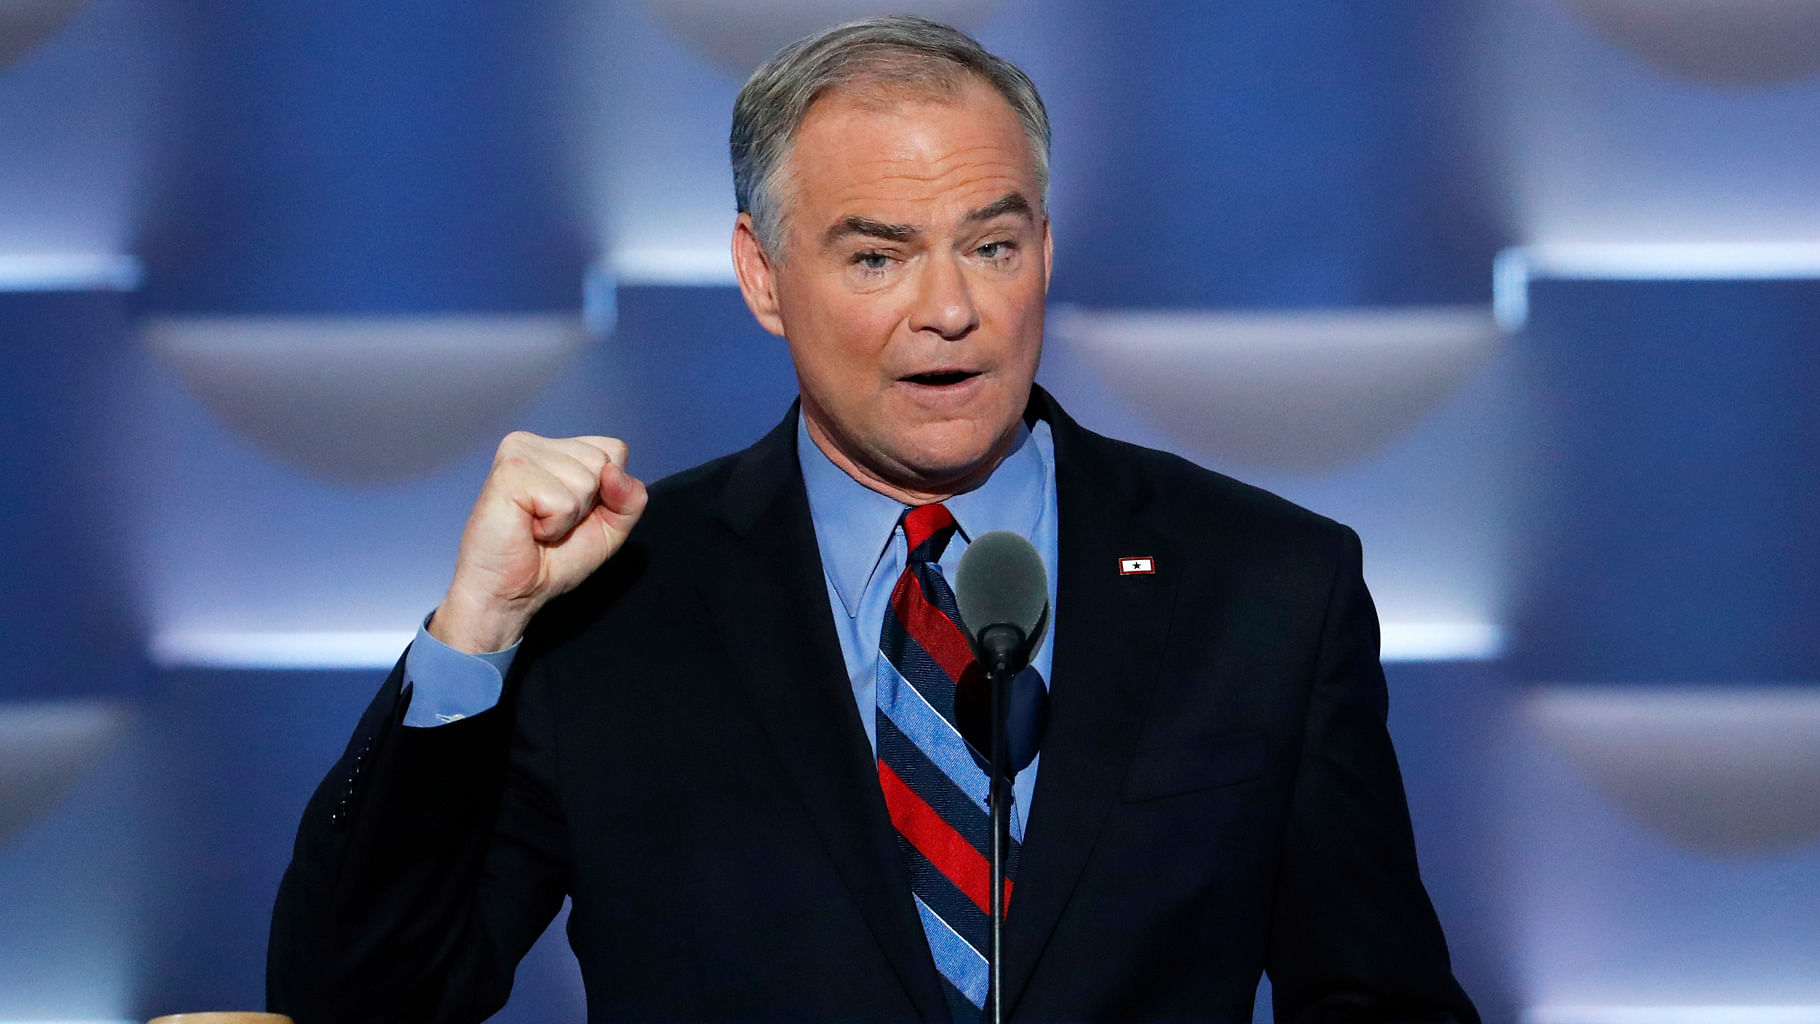 

Democratic vice presidential candidate Tim Kaine speaking during the third day of the Democratic National Convention in Philadelphia. (Photo: AP)